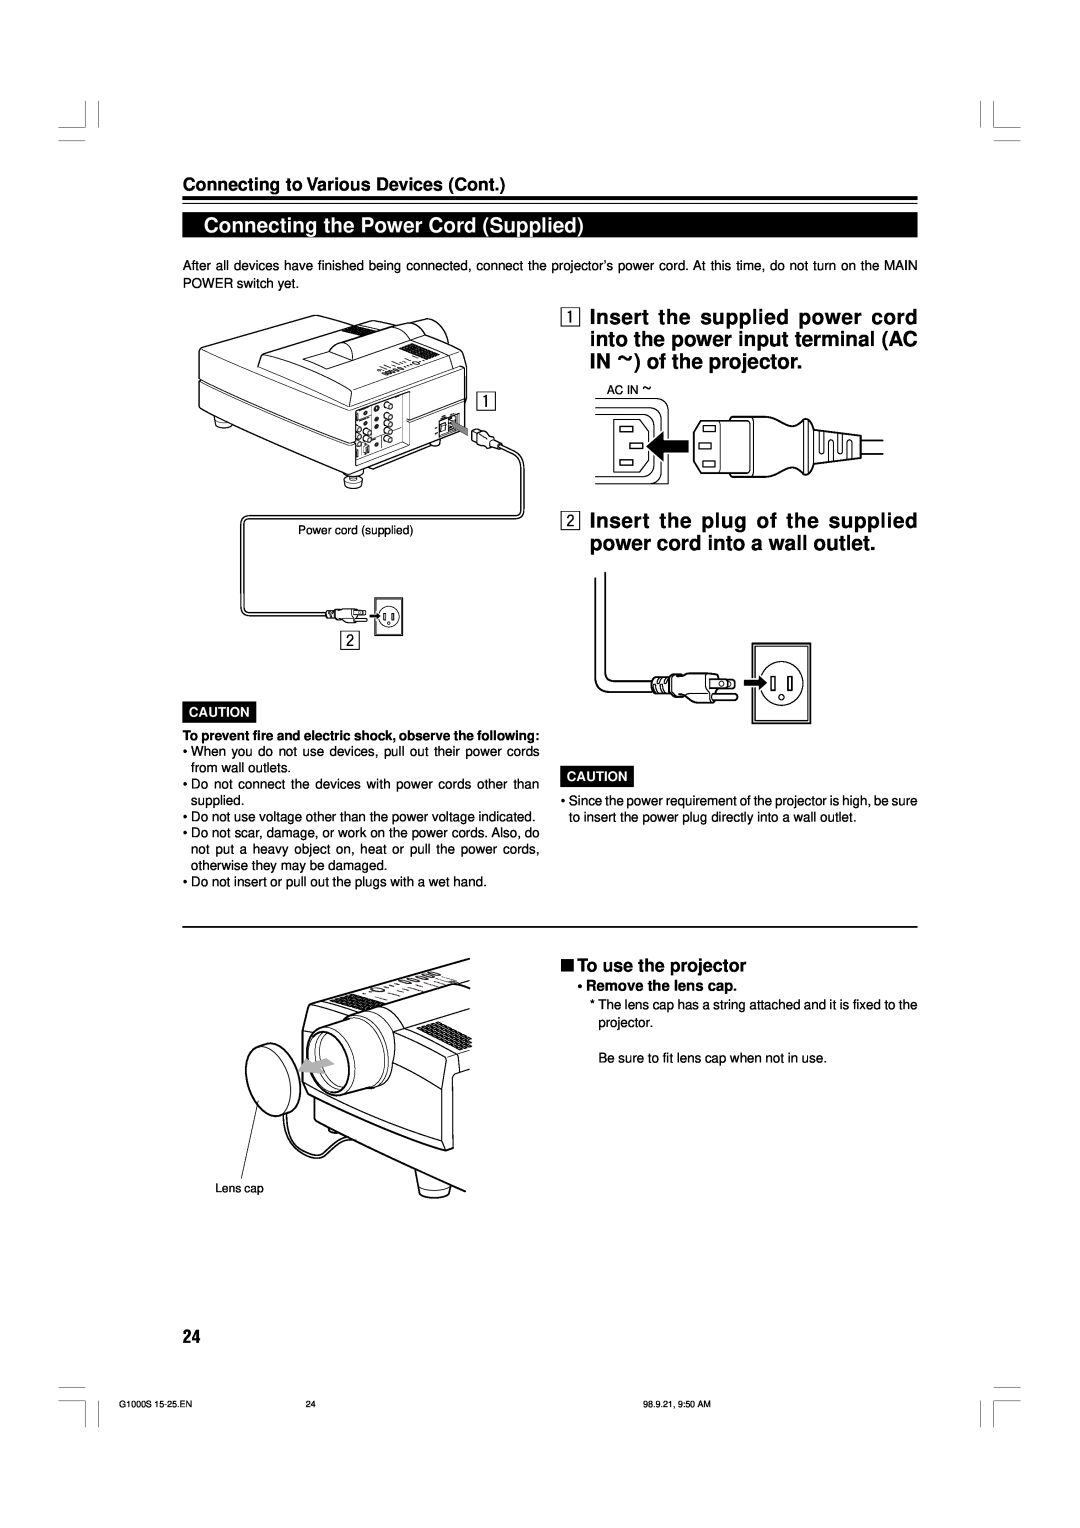 JVC G1000S manual Connecting the Power Cord Supplied, Insert the supplied power cord, Connecting to Various Devices Cont 